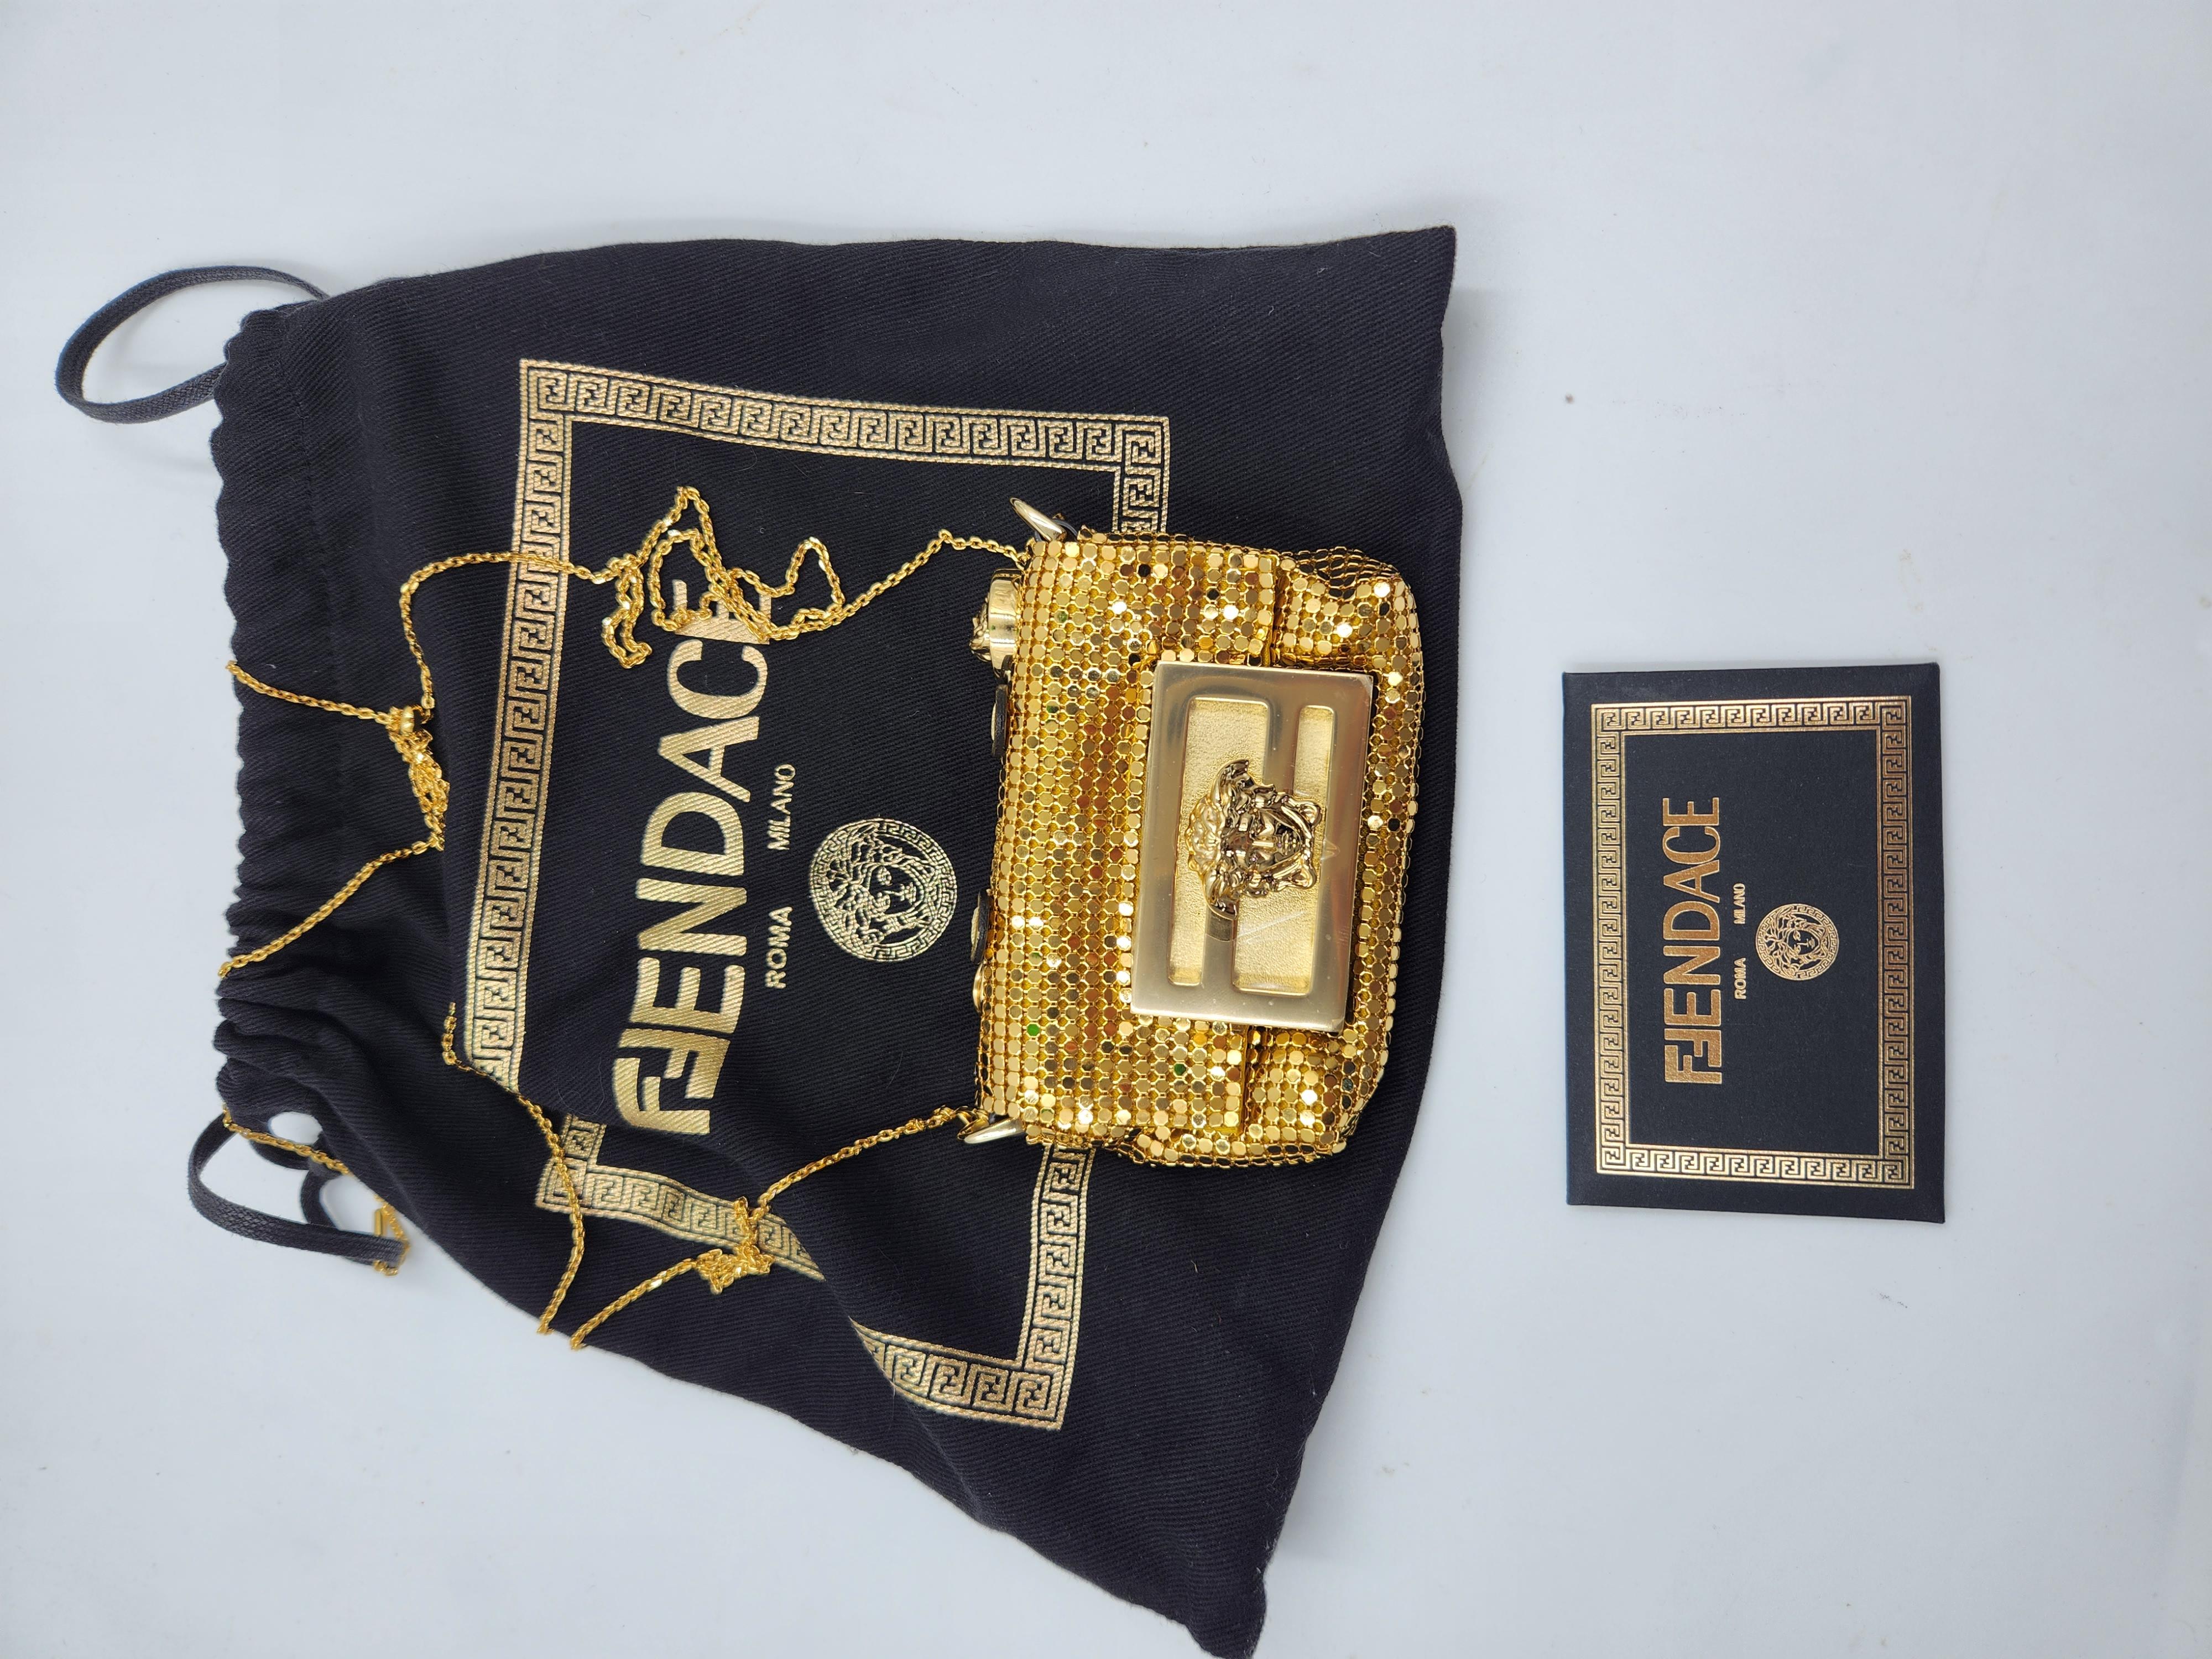 Collector's Versace X Fendi Bag as seen countless celebrities. Brand new with dust bag, full set with tags,

Feature
Material: Mesh, Metal
Color: Gold
Condition: Brand New
Period: 2022
Size:Mini Card Wallet Size
Place of Origin: Italy